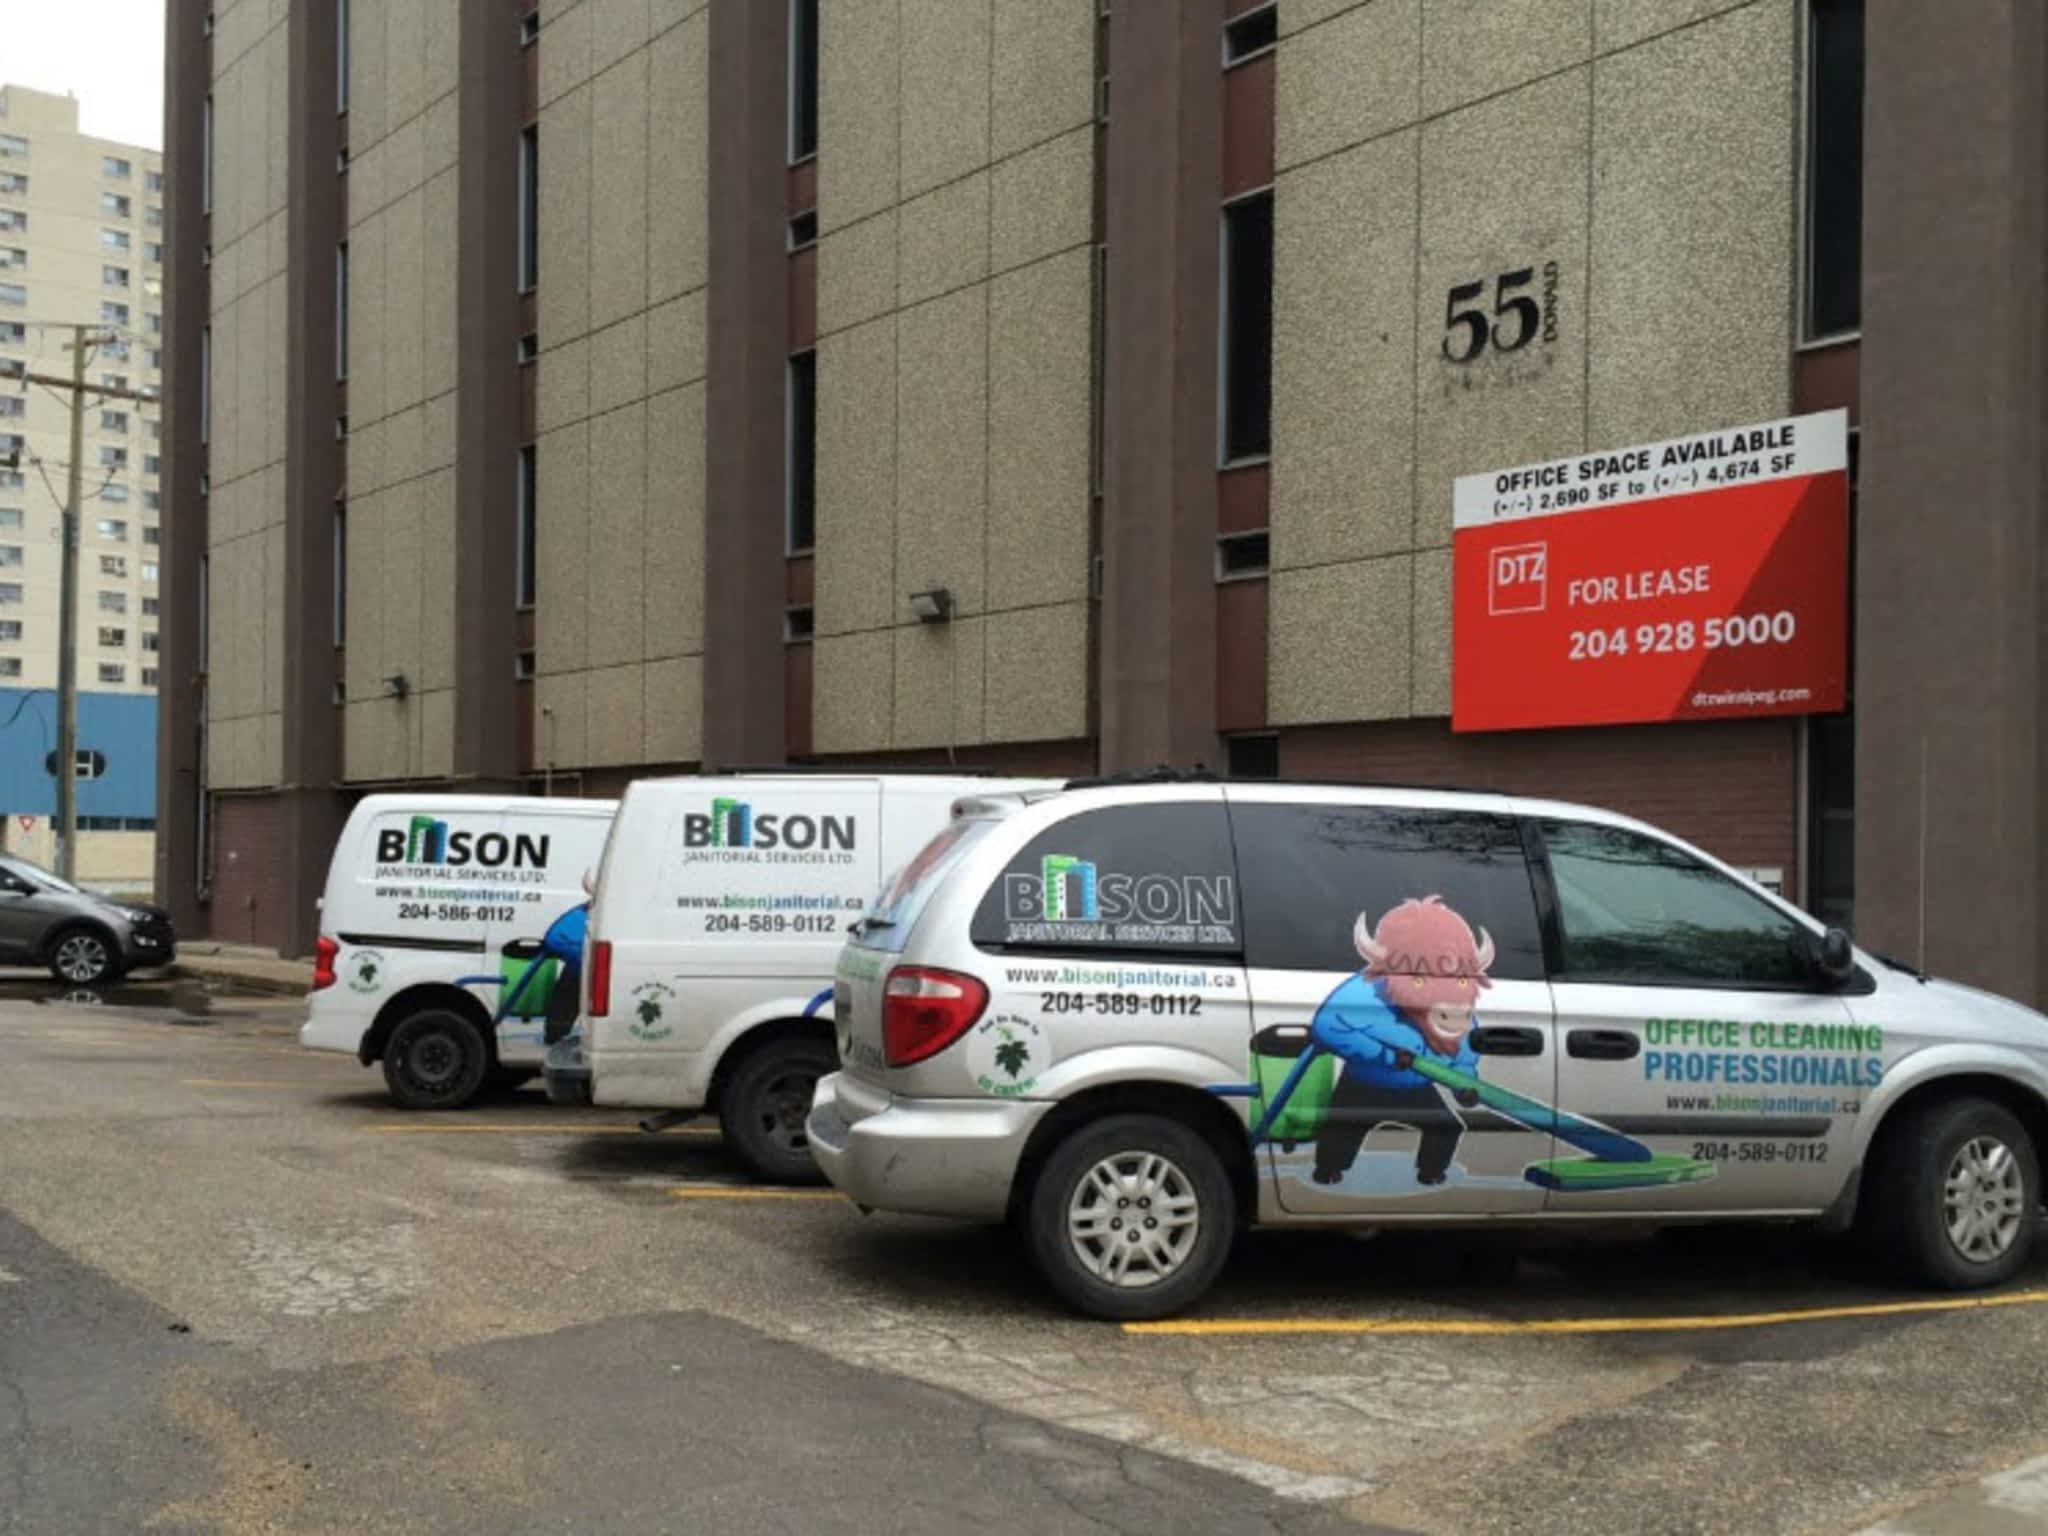 photo Bison Janitorial Services Ltd